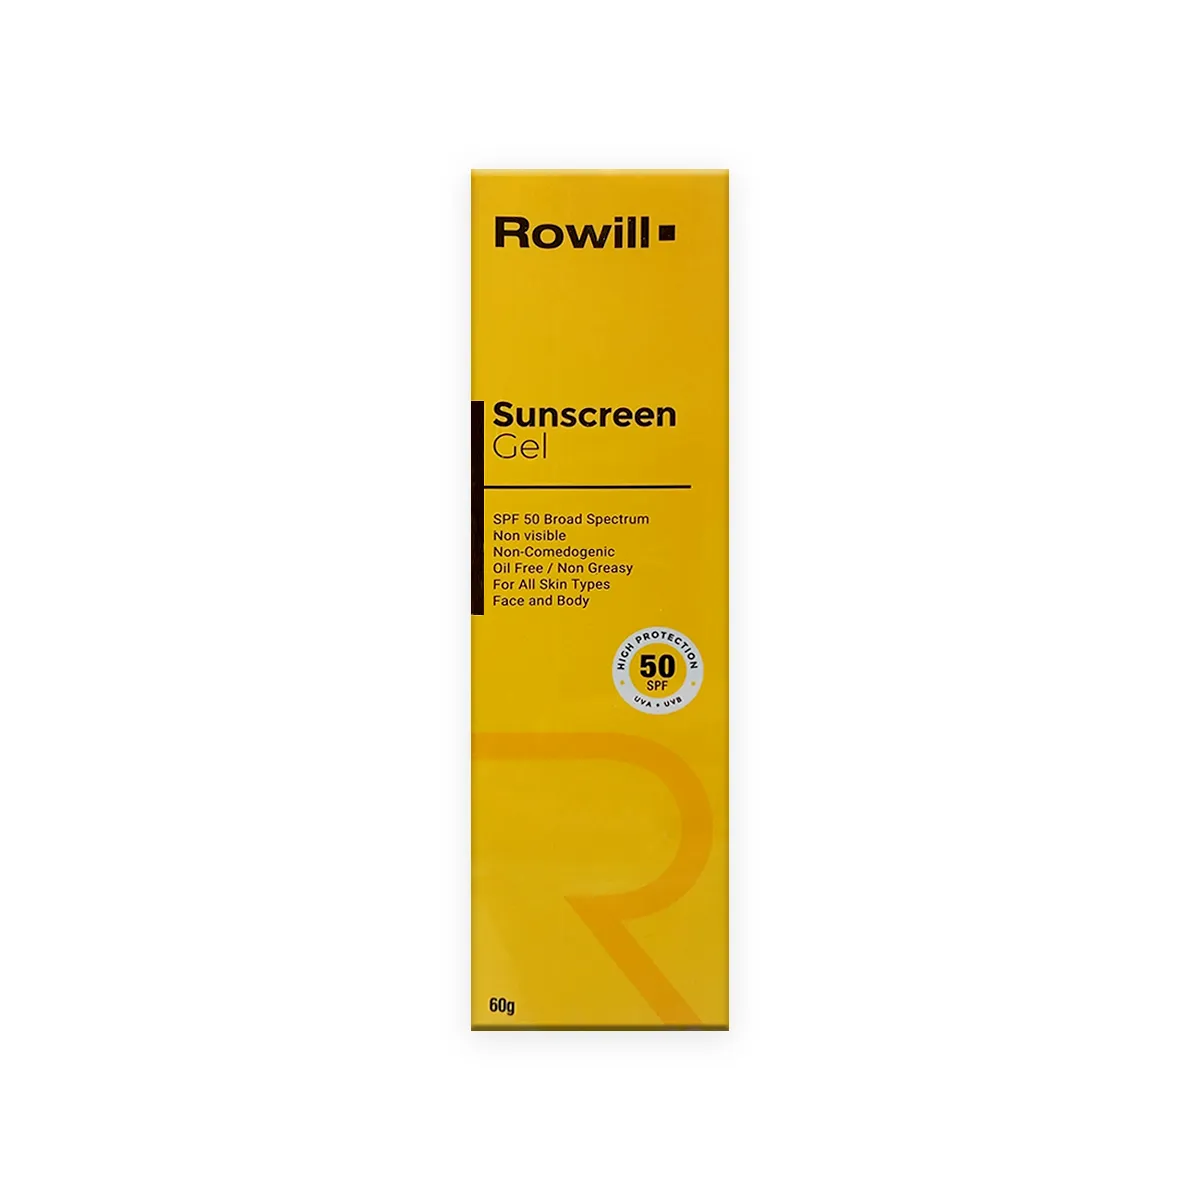 First product image of Rowill Sunscreen Gel 60g